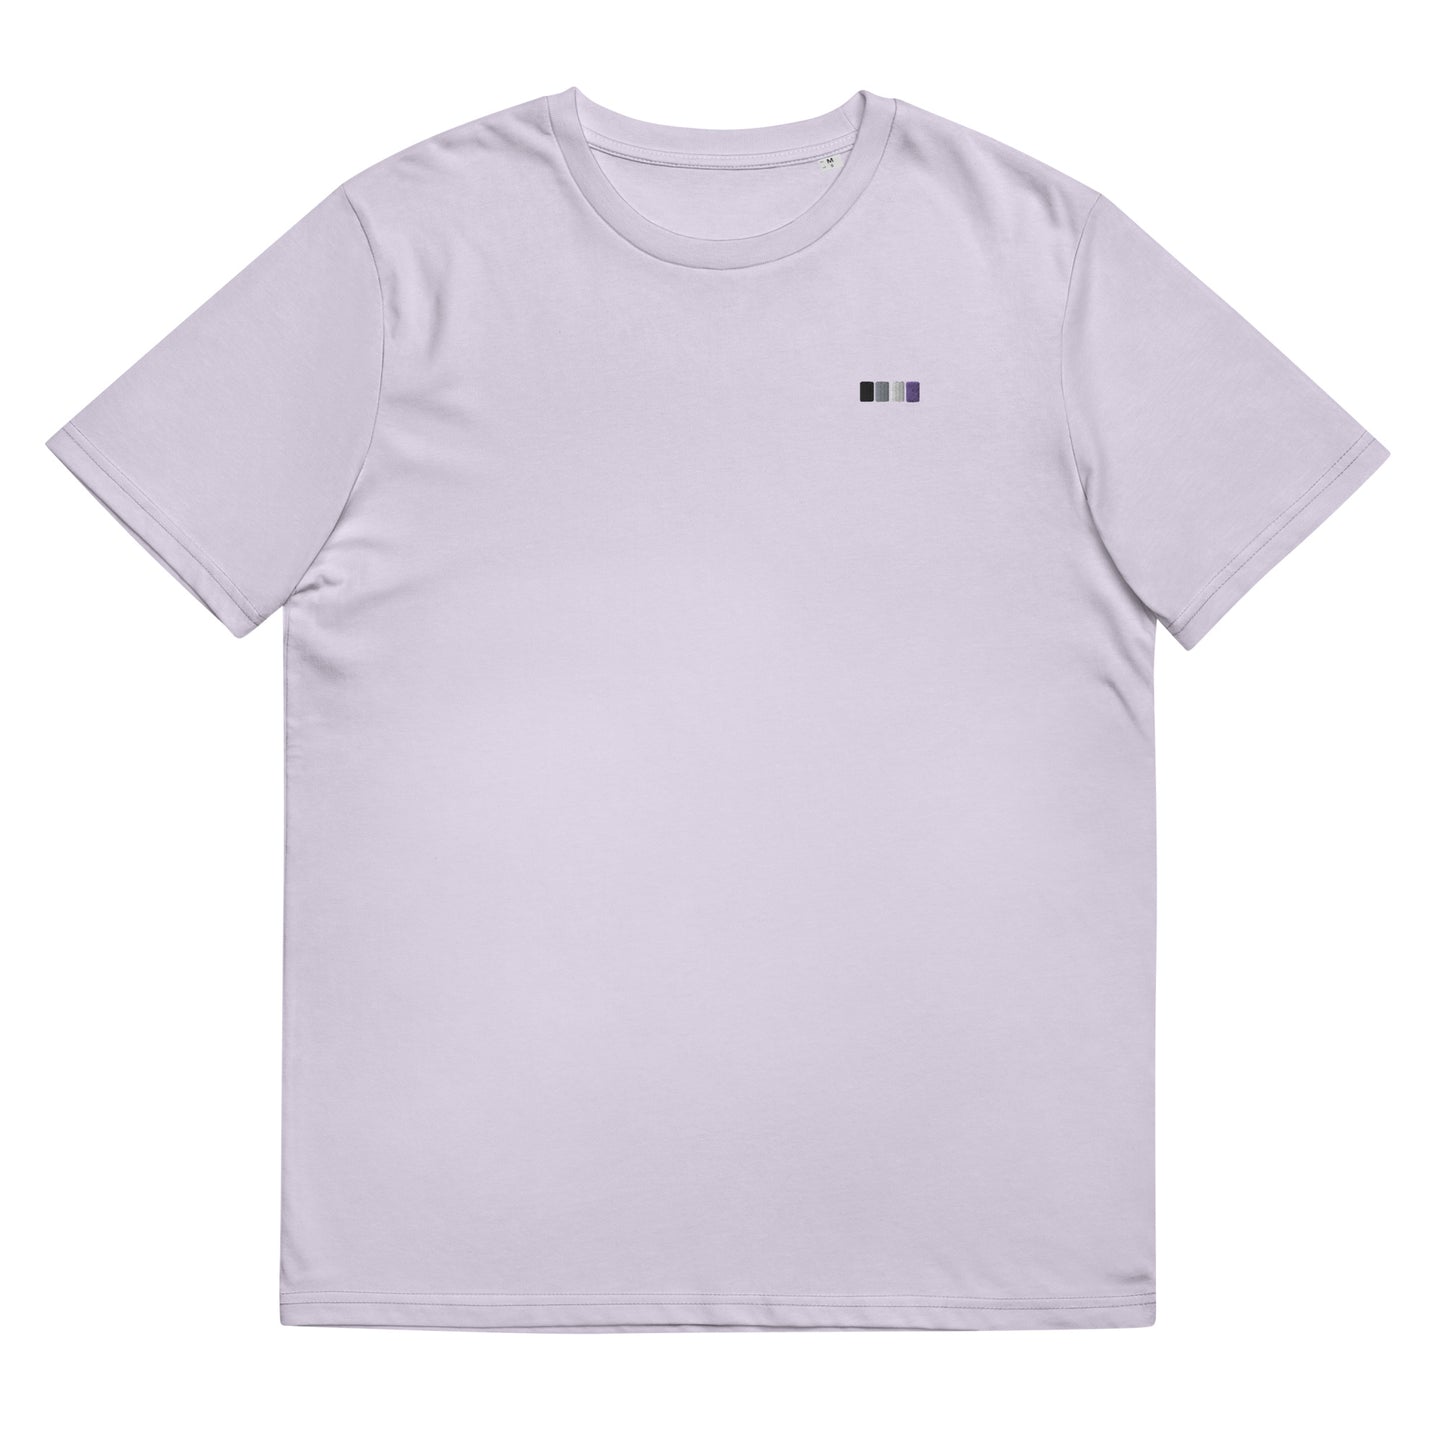 Organic cotton t-shirt: Asexual tales